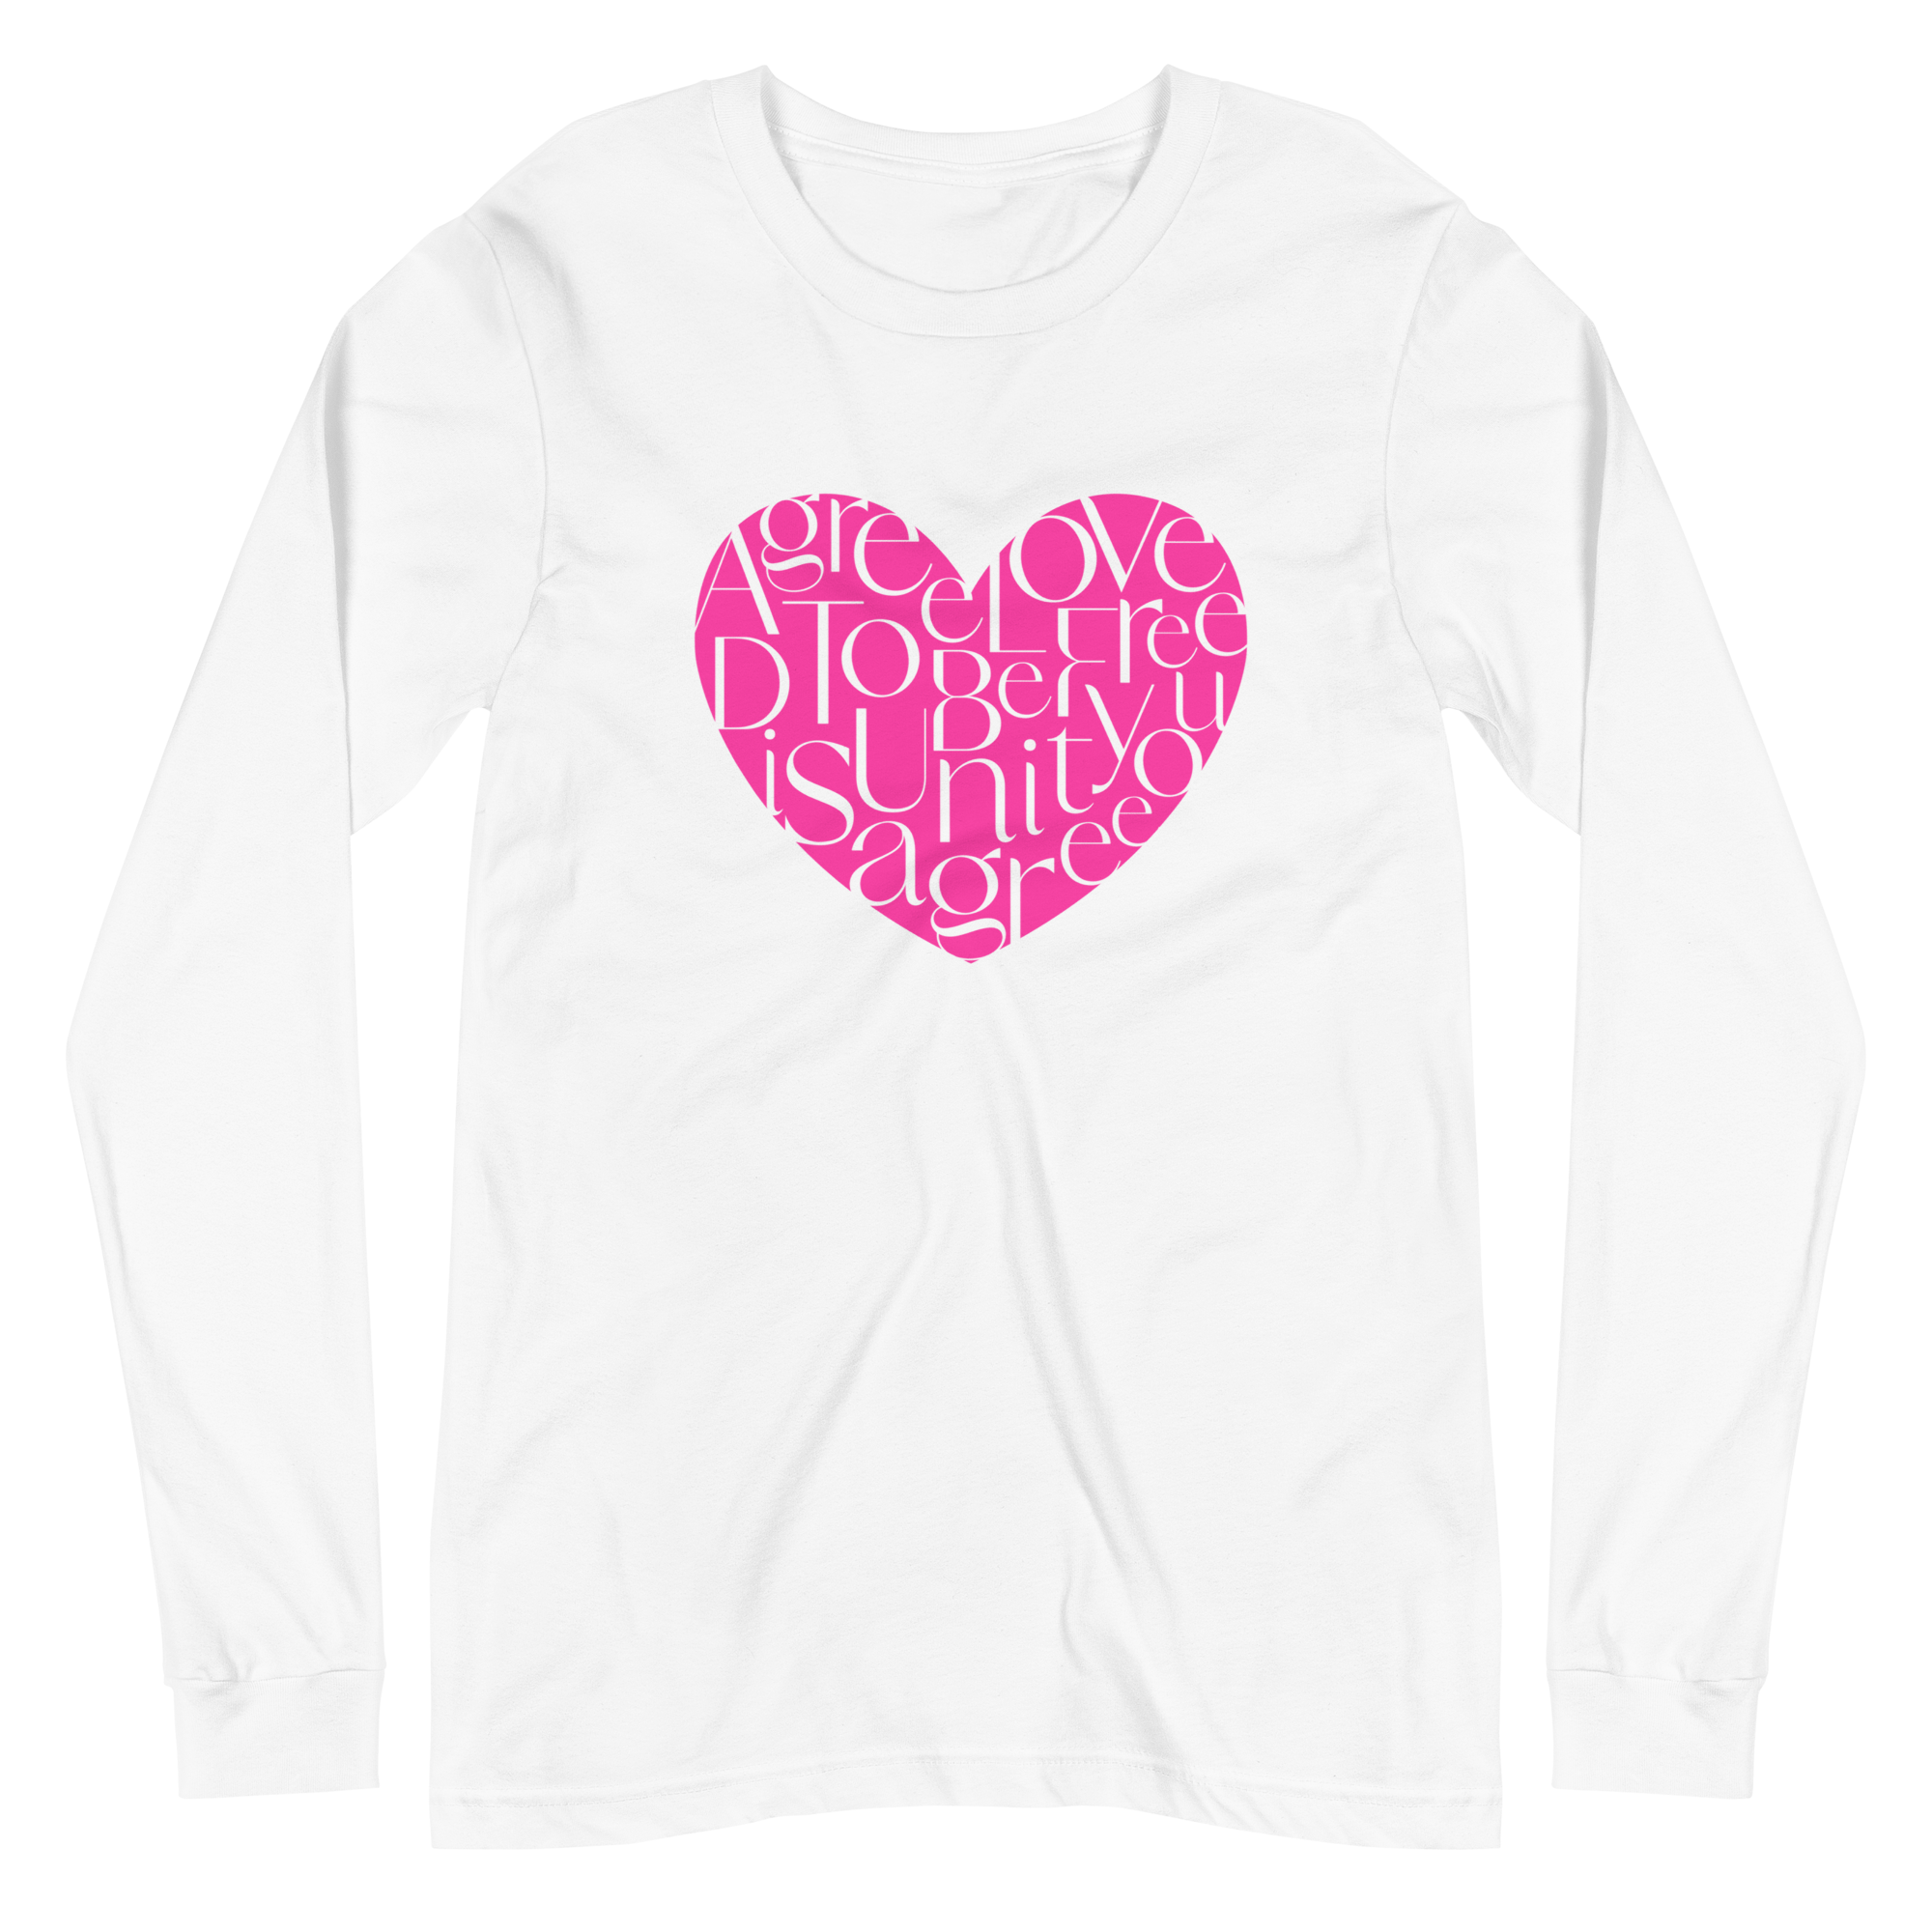 Agree To Disagree, Love, Unity, Be You, Be Free Unisex Long Sleeve Tee